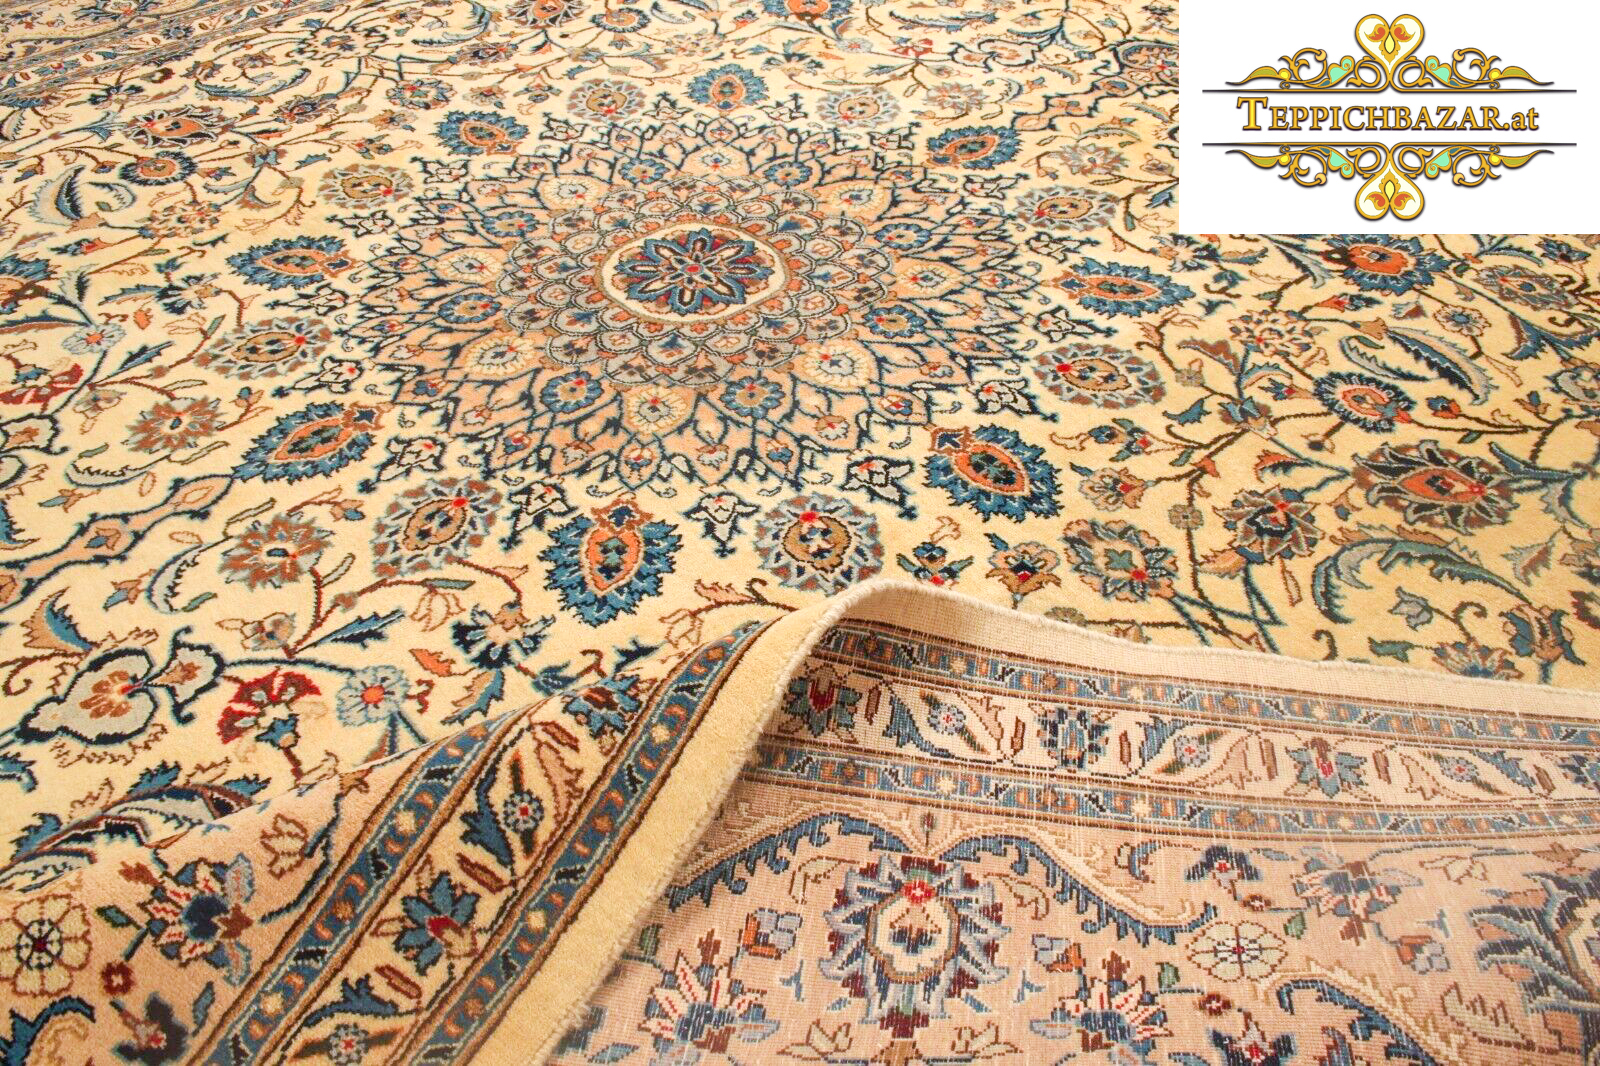 (#H1322) APPROX. 392X298CM HAND-KNOTTED PERSIAN RUG PERSIAN RUG,,WOOL,ORIENTAL RUG,CARPET BAZAR,CARPET,RUGS,PATTERNS,BRICKLER,ORIENTAL RUG TYPE: PERSIAN RUG WITH SIGNATURE PILE: 100% WOOL WITHOUT ADDITIONS WARP: 100% COTTON SIZE: 392 298X160.000CM NODE COUNT: APPROX. XNUMX KNOTS PER M² CONDITION: VERY GOOD, WITH MINIMAL PATINA PERSIAN CARPET ORIENTAL CARPET